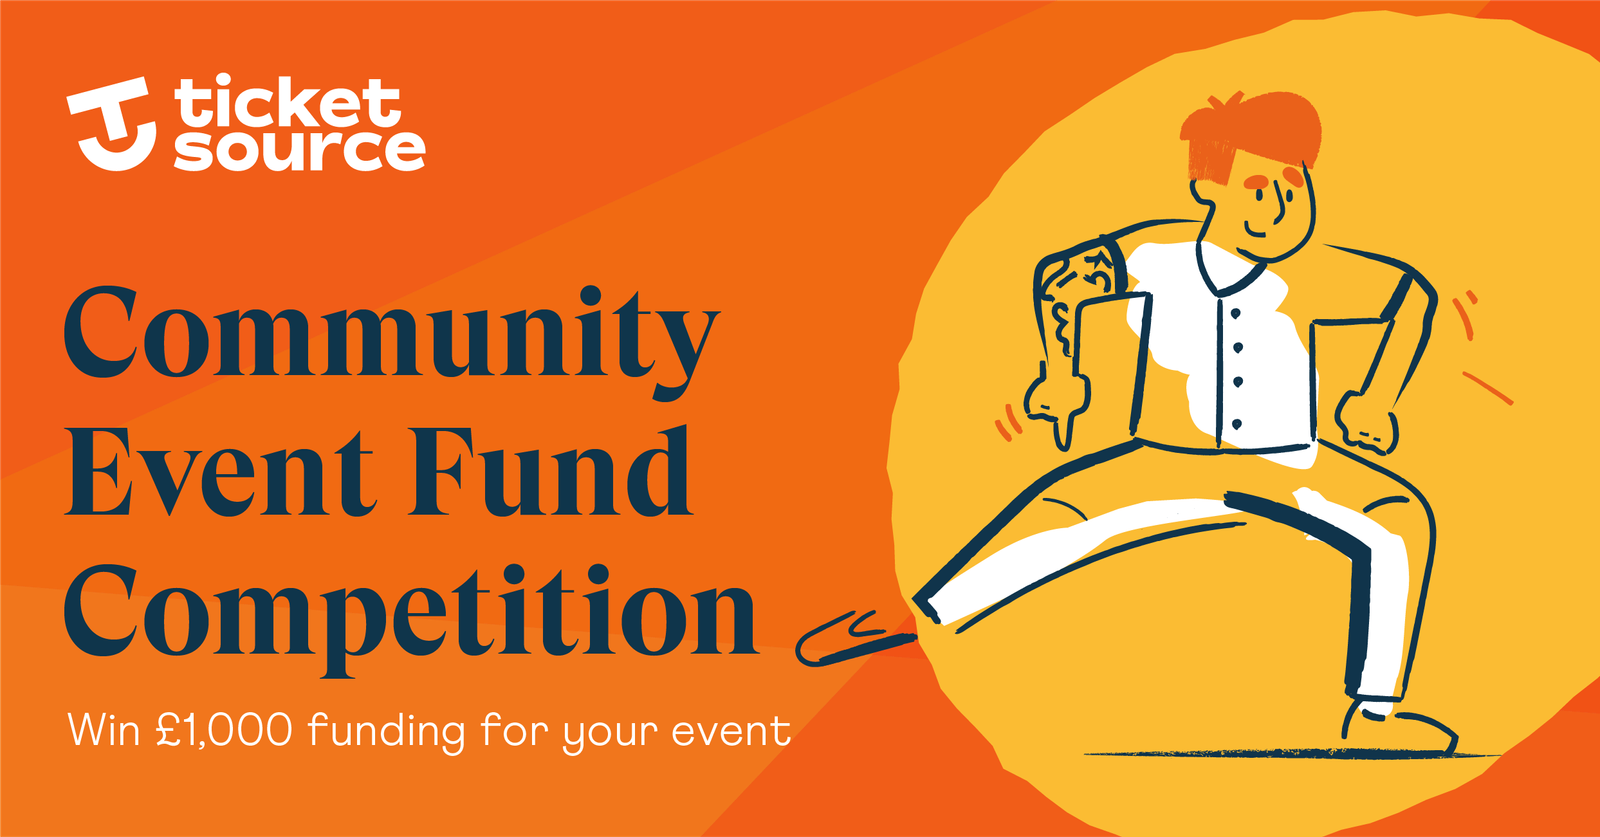 YOUR NEWS – TicketSource Re-Launches Community Event Fund